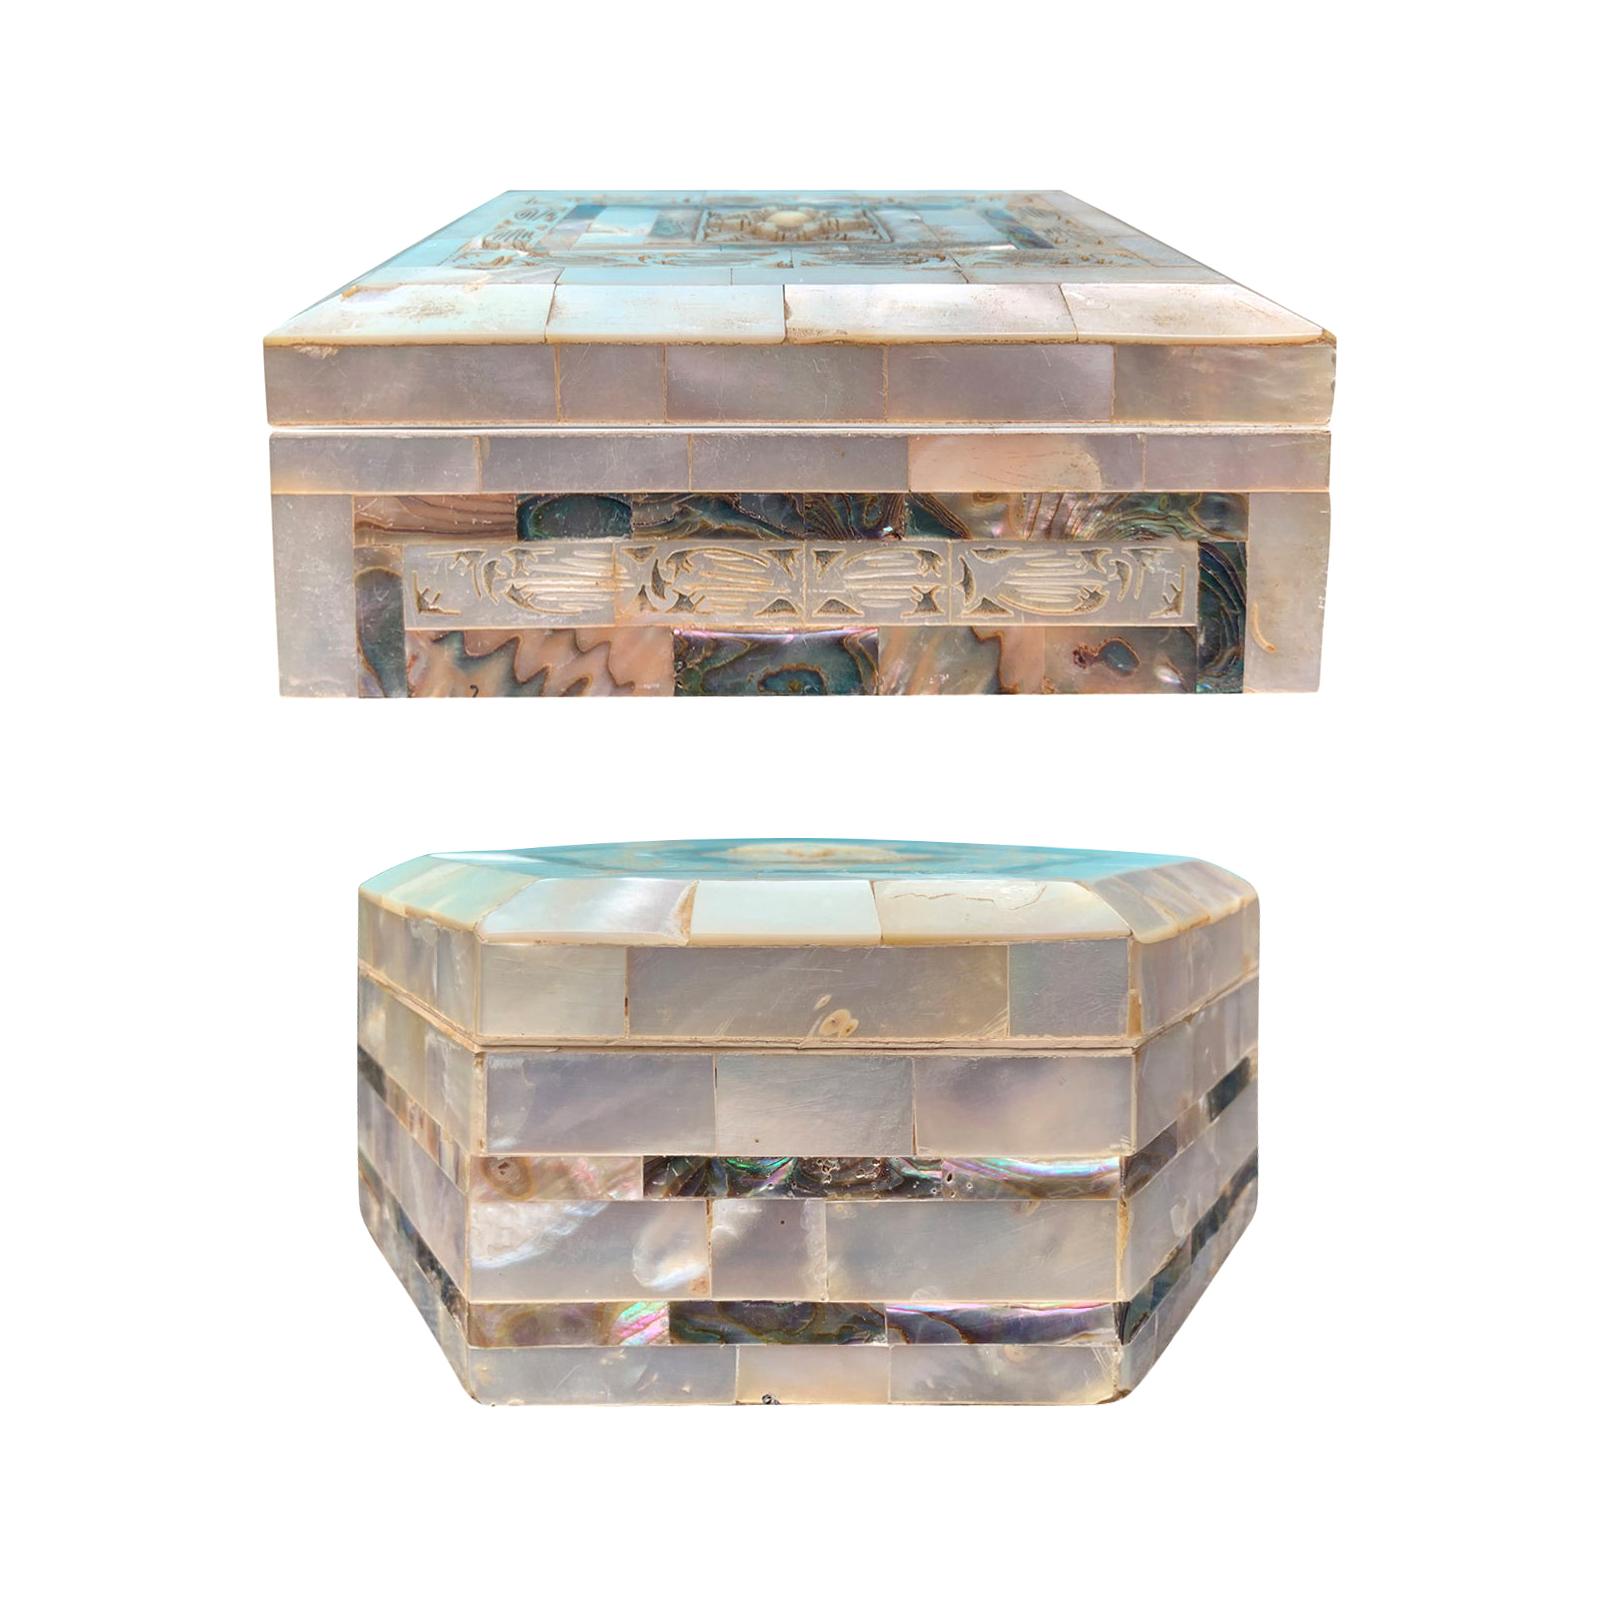 Two Anglo-Indian Visakhapatnam Mother of Pearl Inlaid Boxes, circa 1920s-1930s